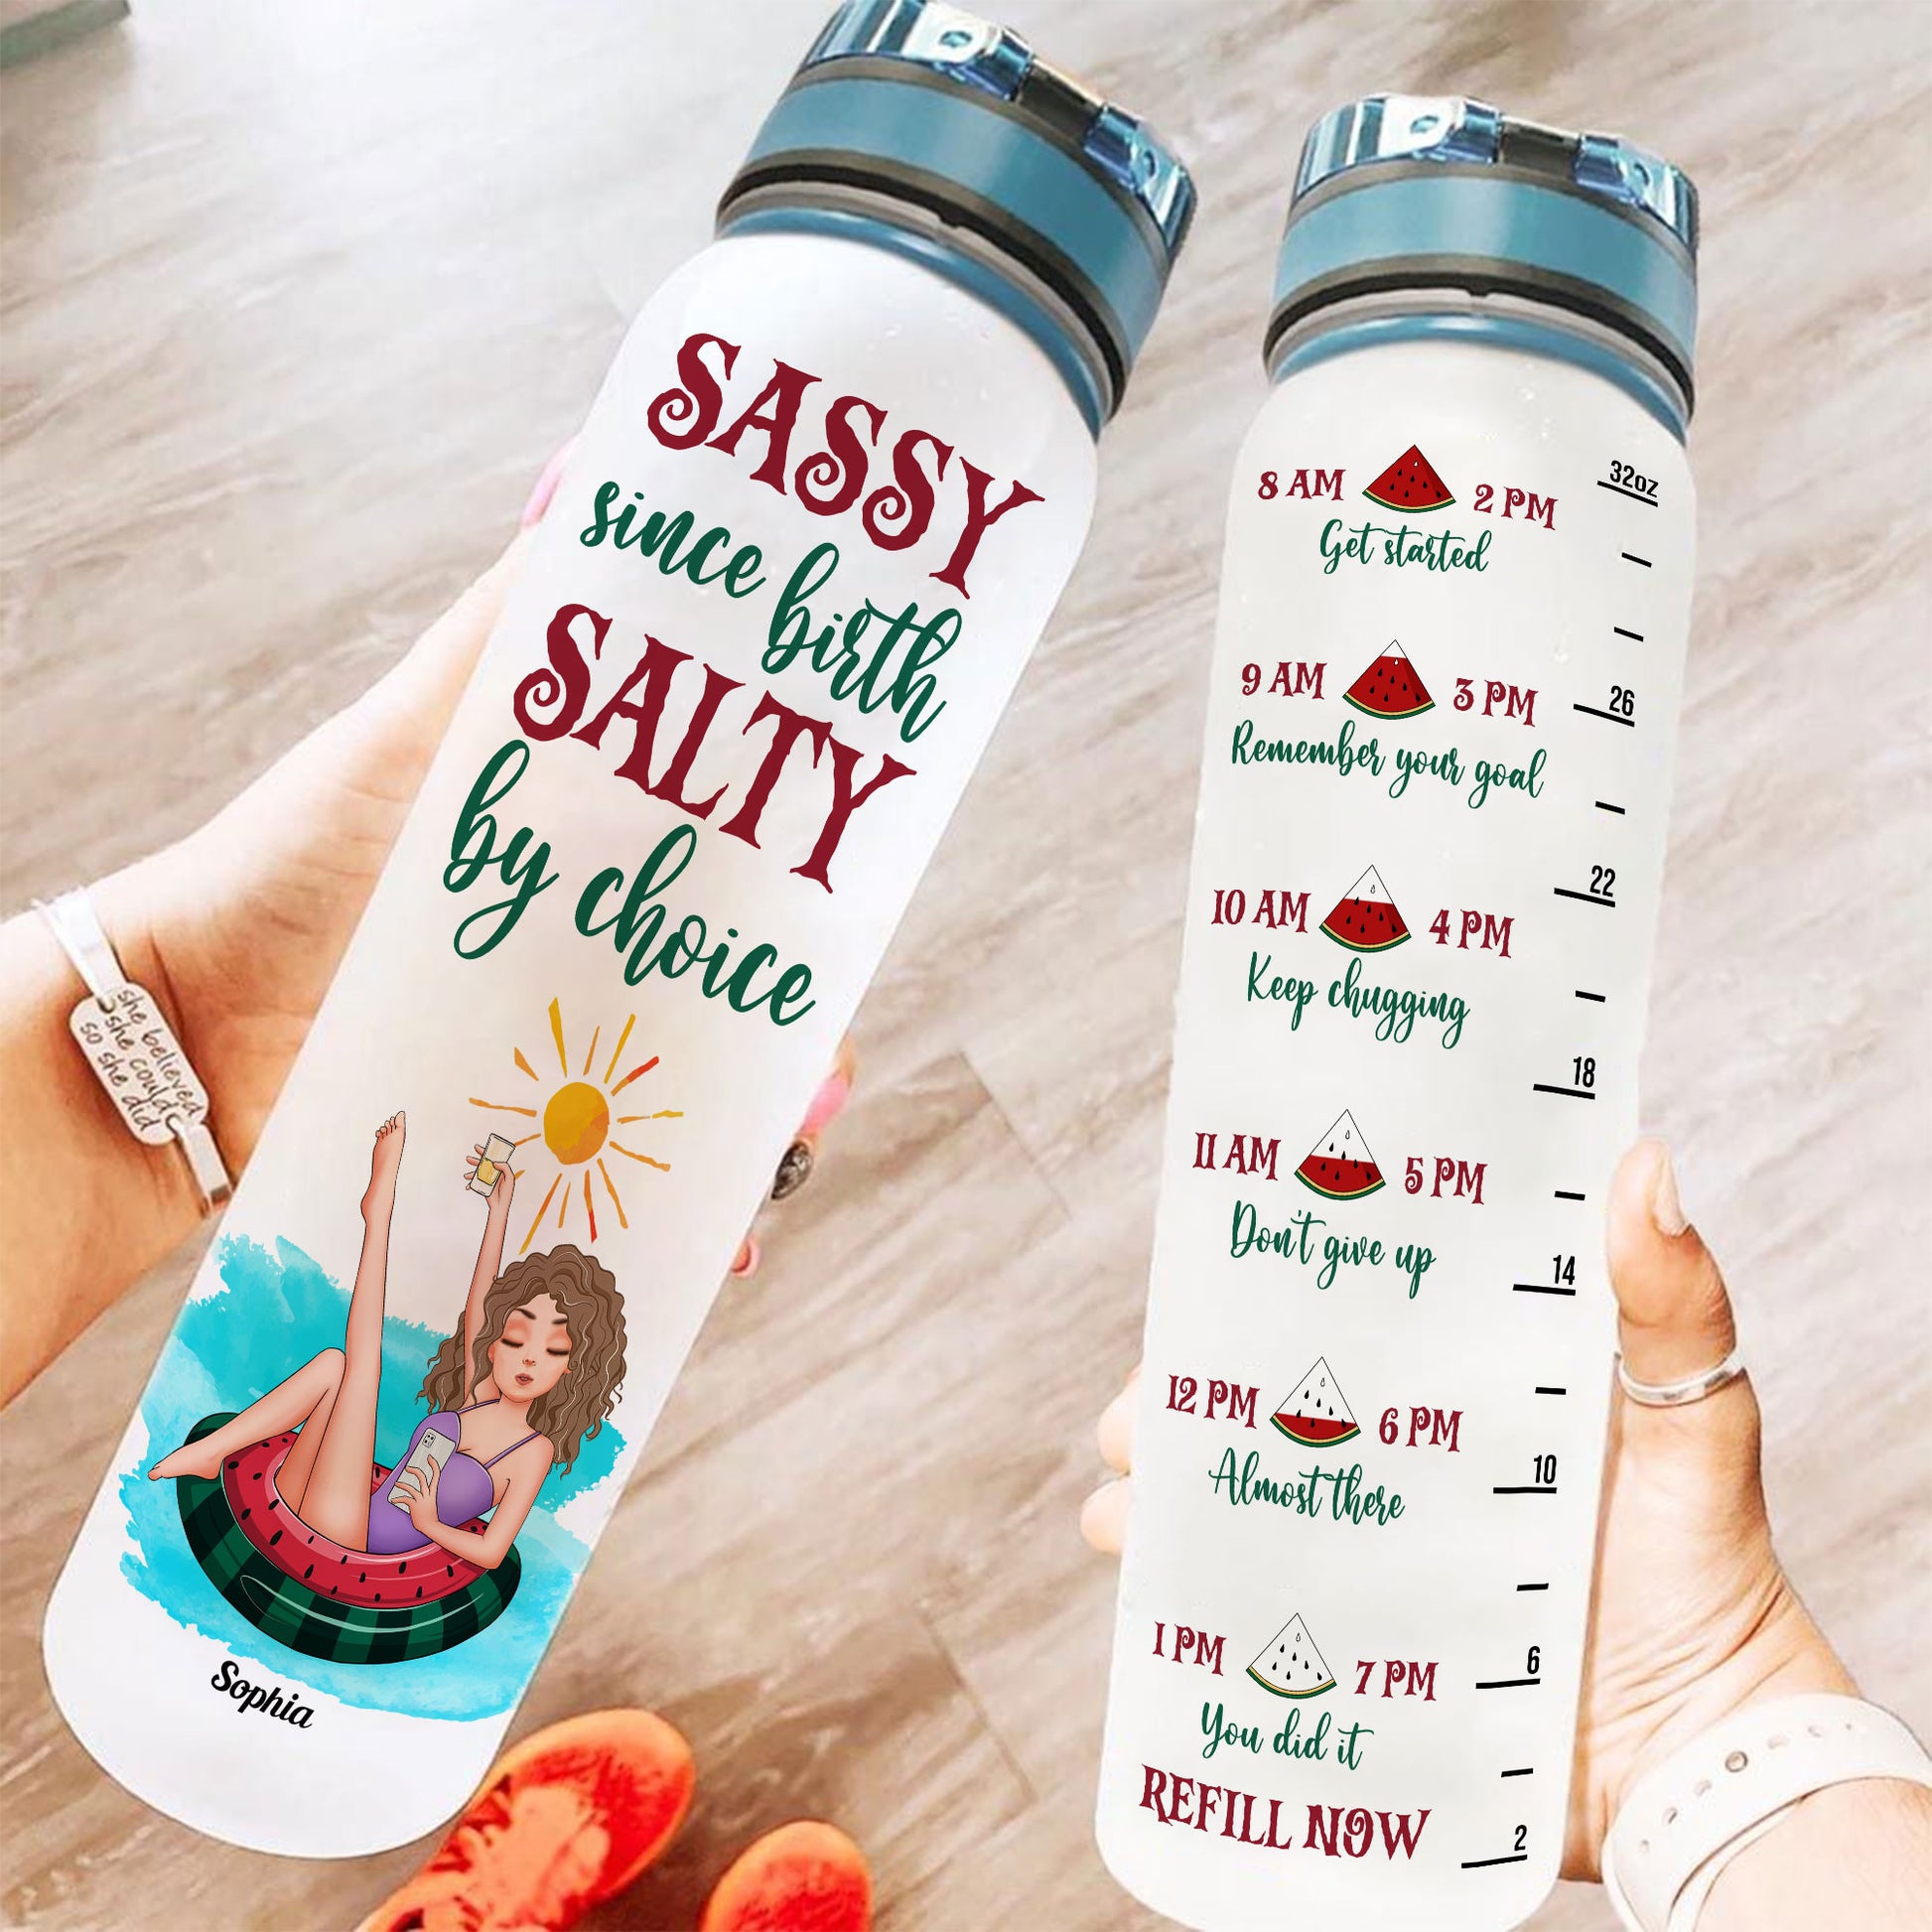 Sassy Since Birth Salty By Choice - Personalized Tracker Bottle - Birthday Summer Gift For Beach Lovers, Besties, Sisters, Daughters, Girlfriends